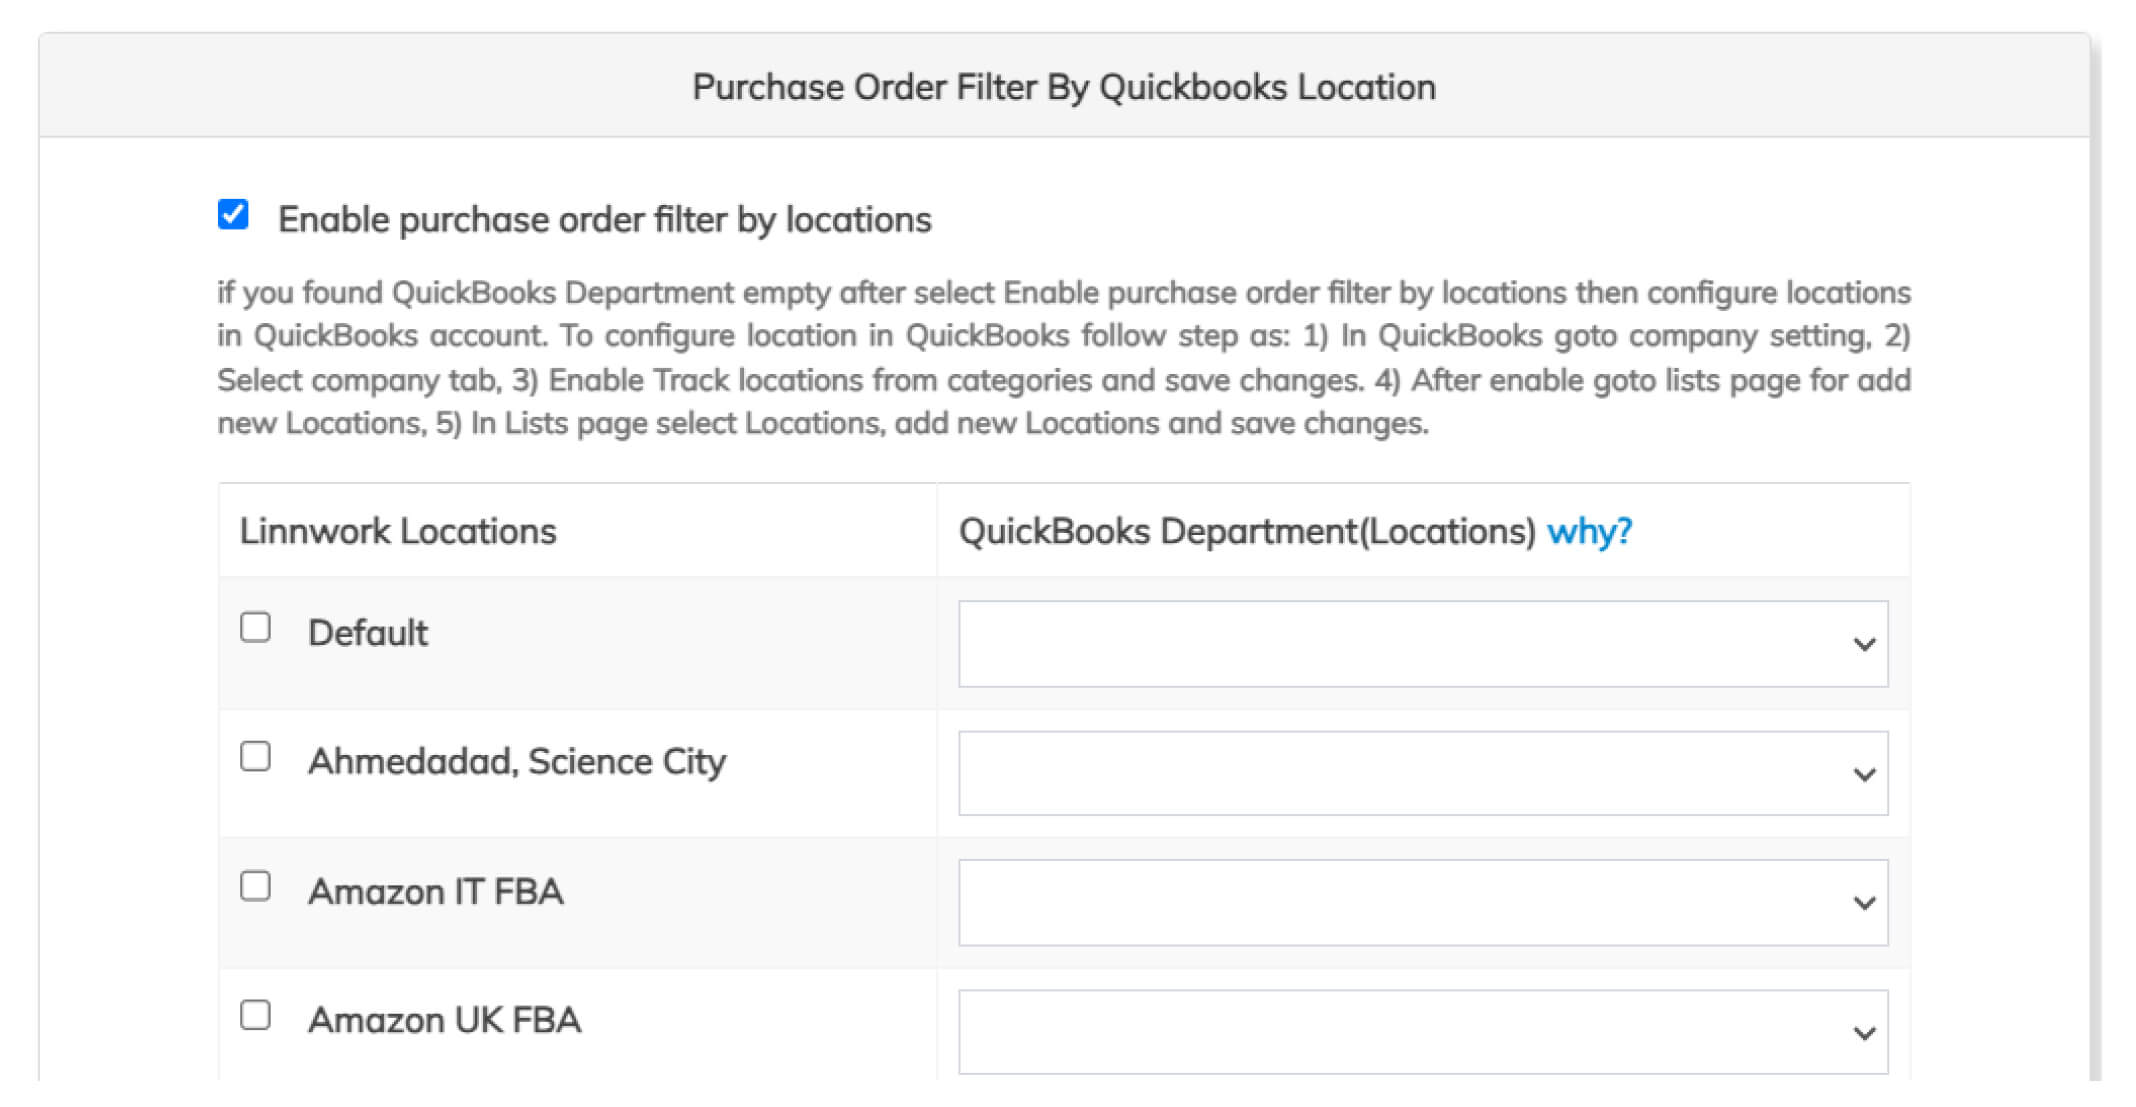 Enable purchase order filter by locations